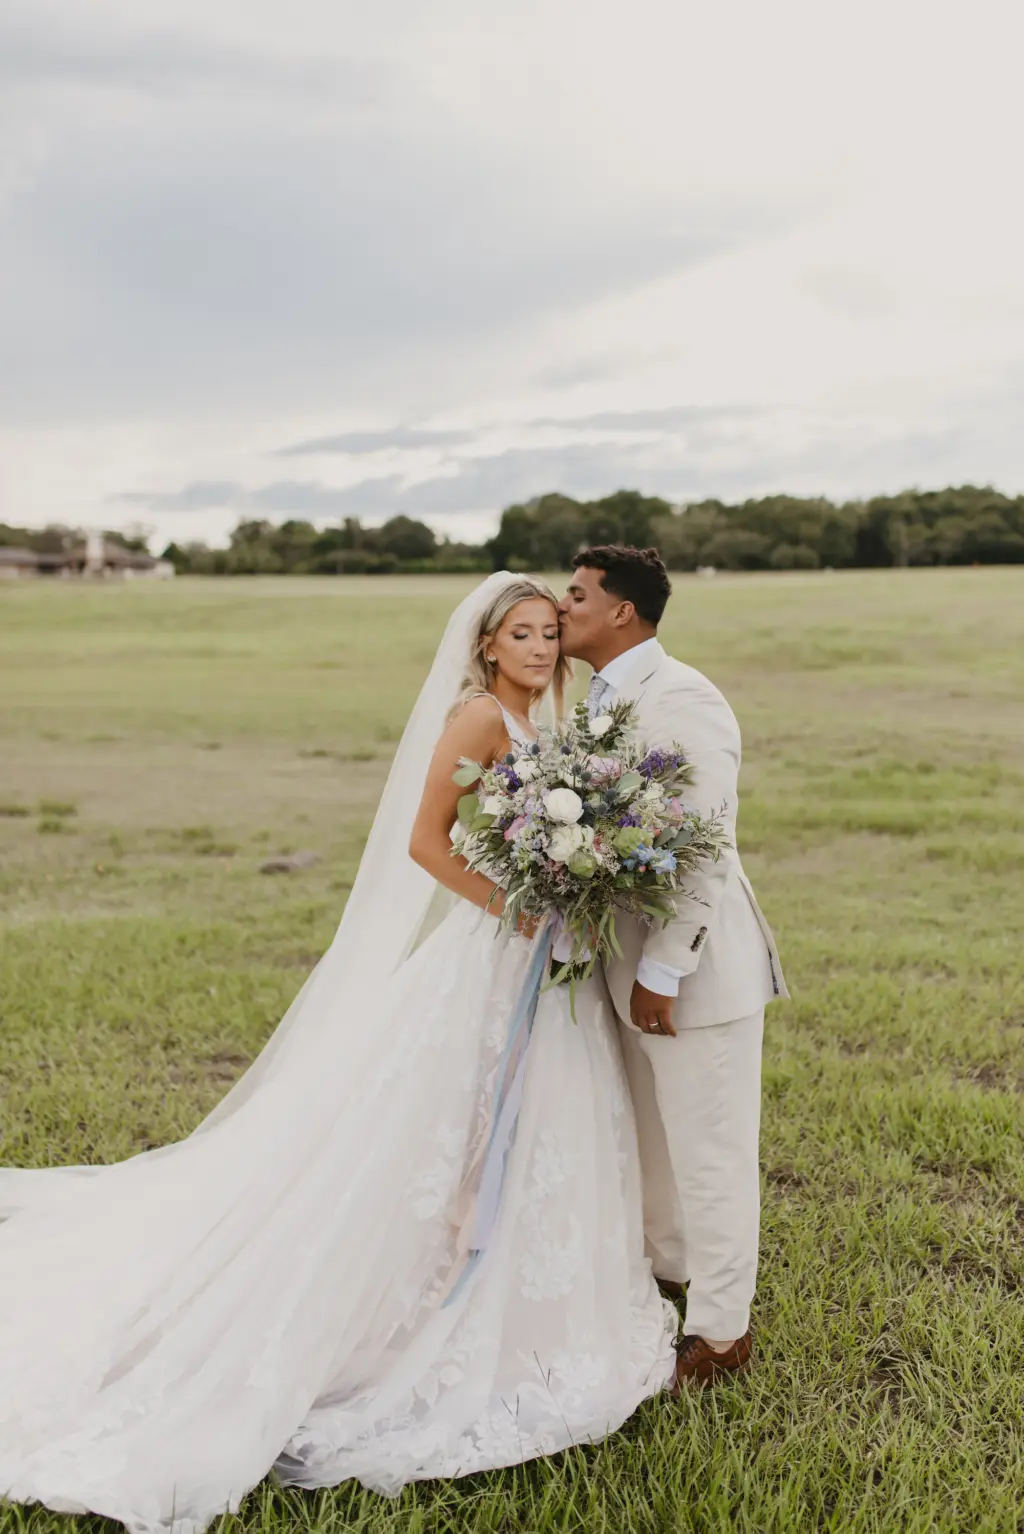 Romantic Bride and Groom in a Field Wedding Portrait | White Open Back Lace and Tulle Lillian West Wedding Dress with Maggie Sottero Veil Inspiration | Cream Groom's Suit | Pastel Bridal Bouquet with White Roses, Eucalyptus, Blue Thistle, and Greenery Ideas | Tampa Bay Photographer Valentina Rose Photography | Event Venue Simpson Lakes | Planner EventFull Weddings